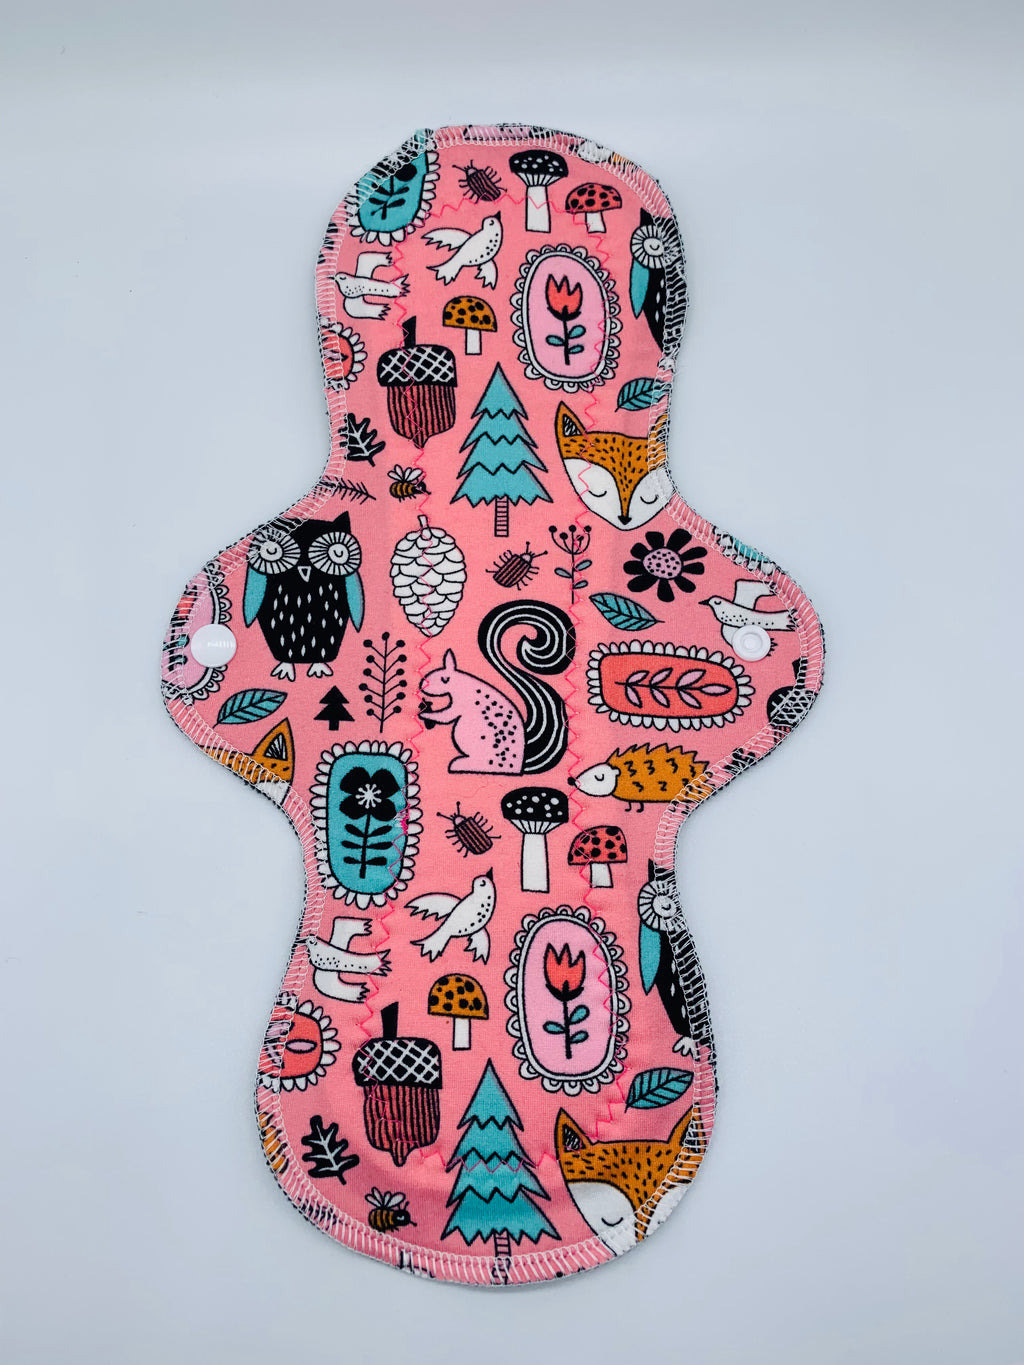 12” moderate flow cloth reusable pads “ pretty in pink”